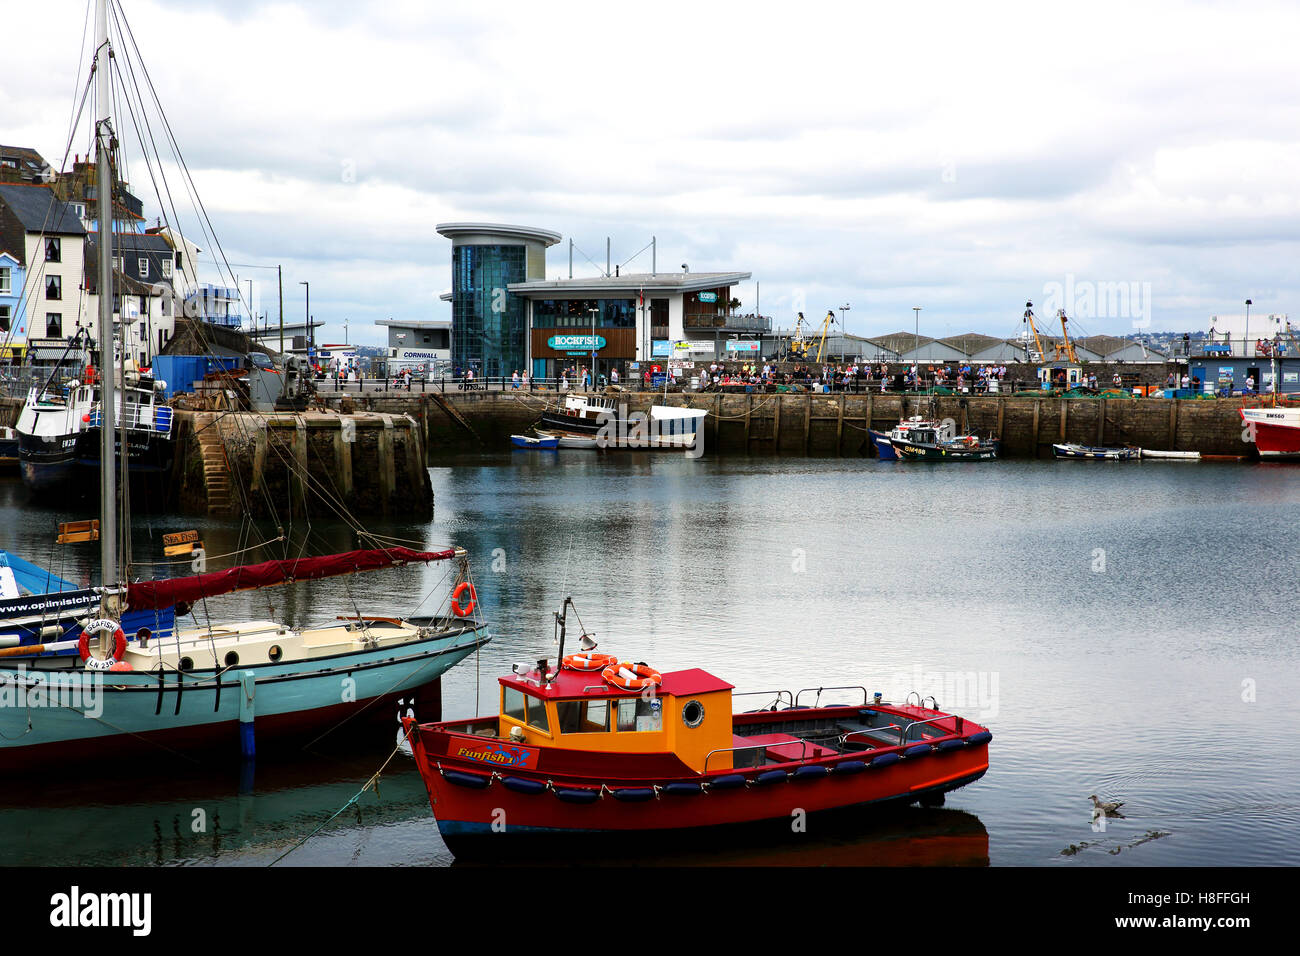 Boats in Brixham harbour, Devon, UK. The Rockfish seafood restaurant and many tourists can be seen in the background. Stock Photo